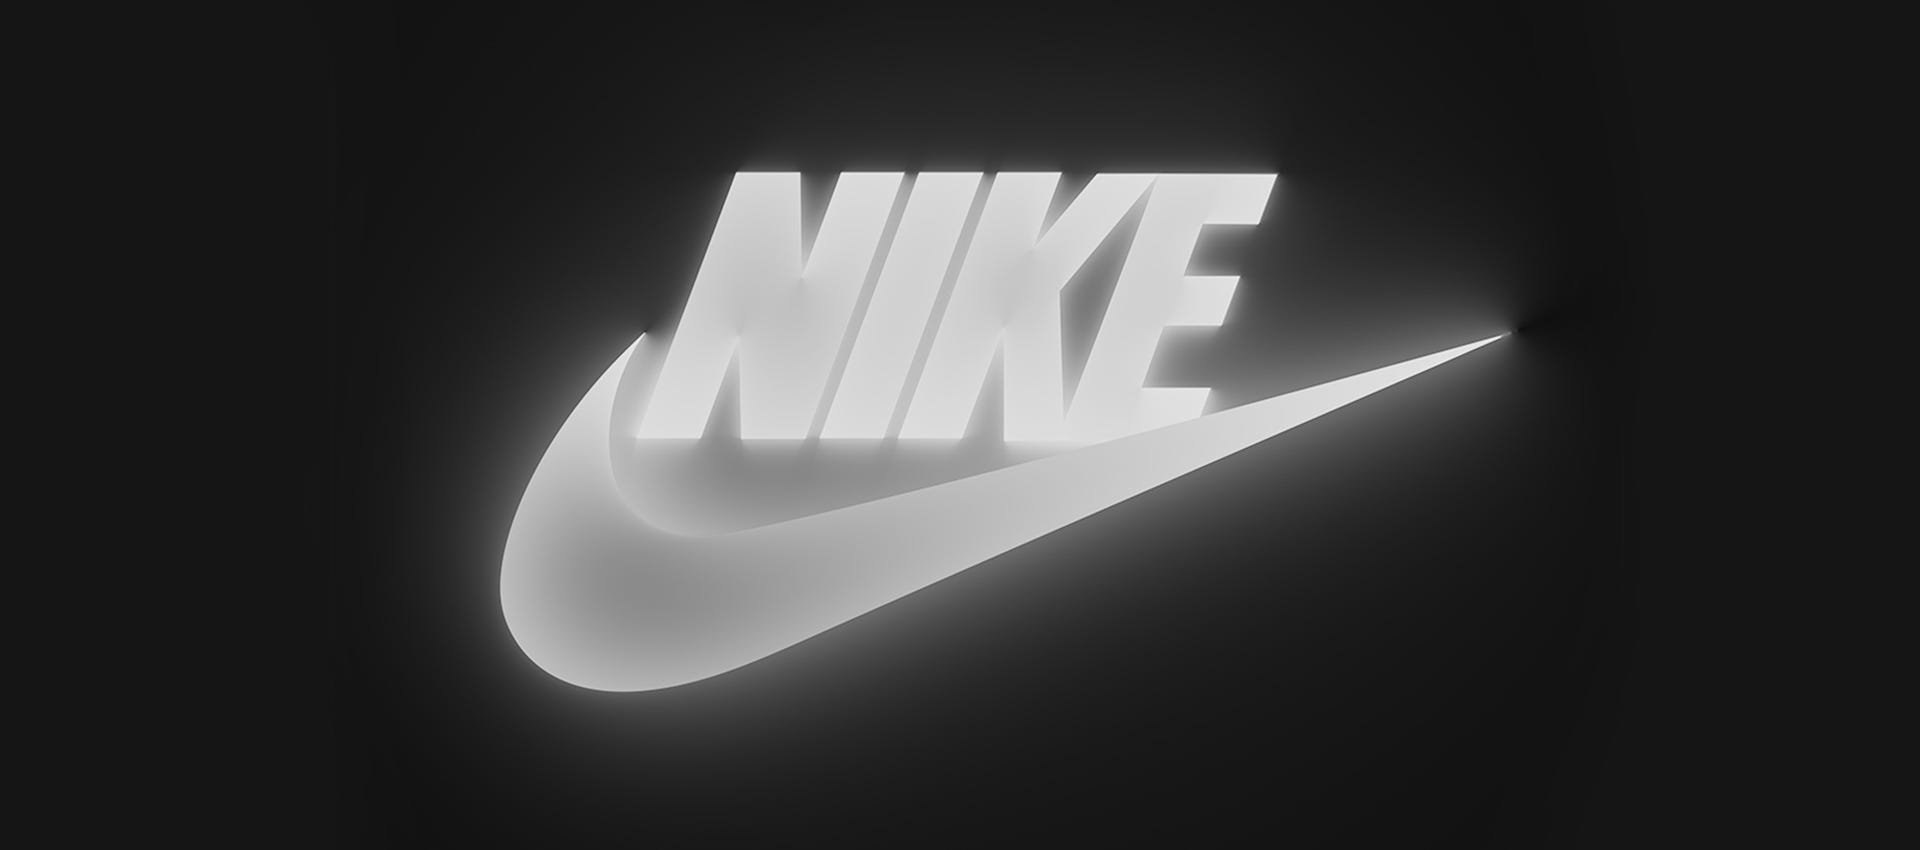 nike is a brand